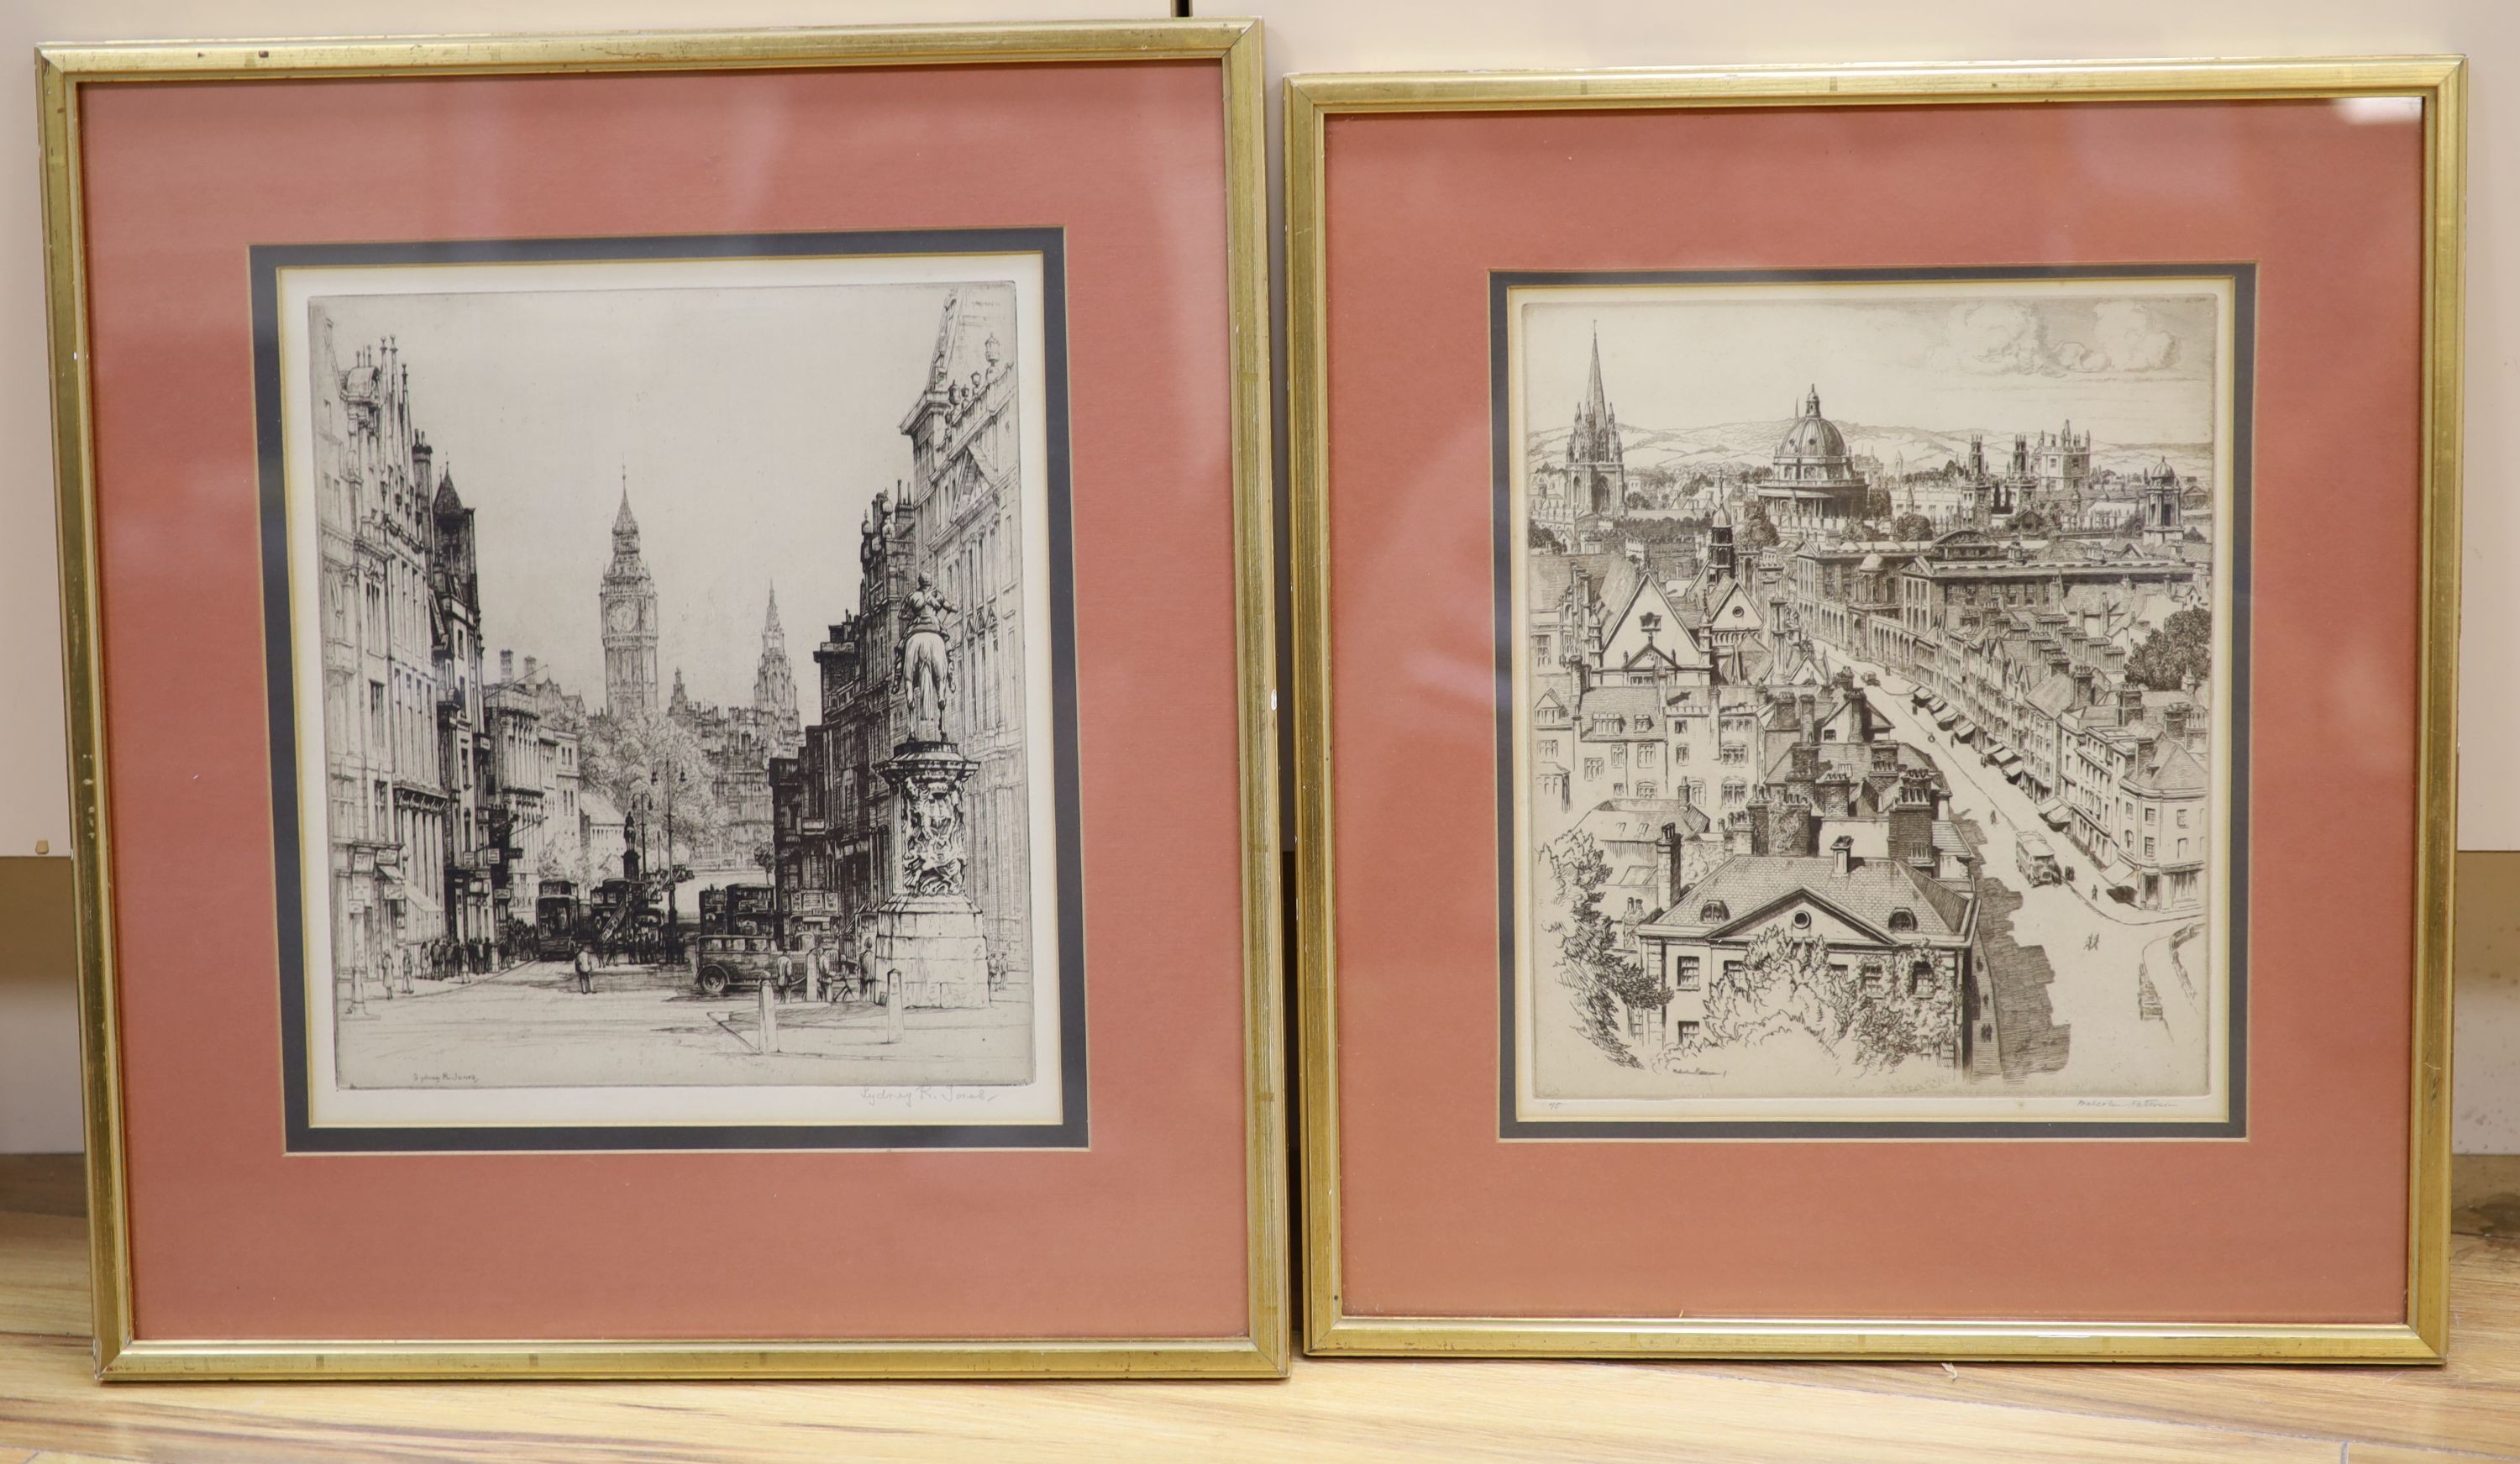 Two framed etchings 1920's of London by George Malcolm Patterson (1873-1941) and Sydney R Jones (1881-1966), largest 25 x 22cm.